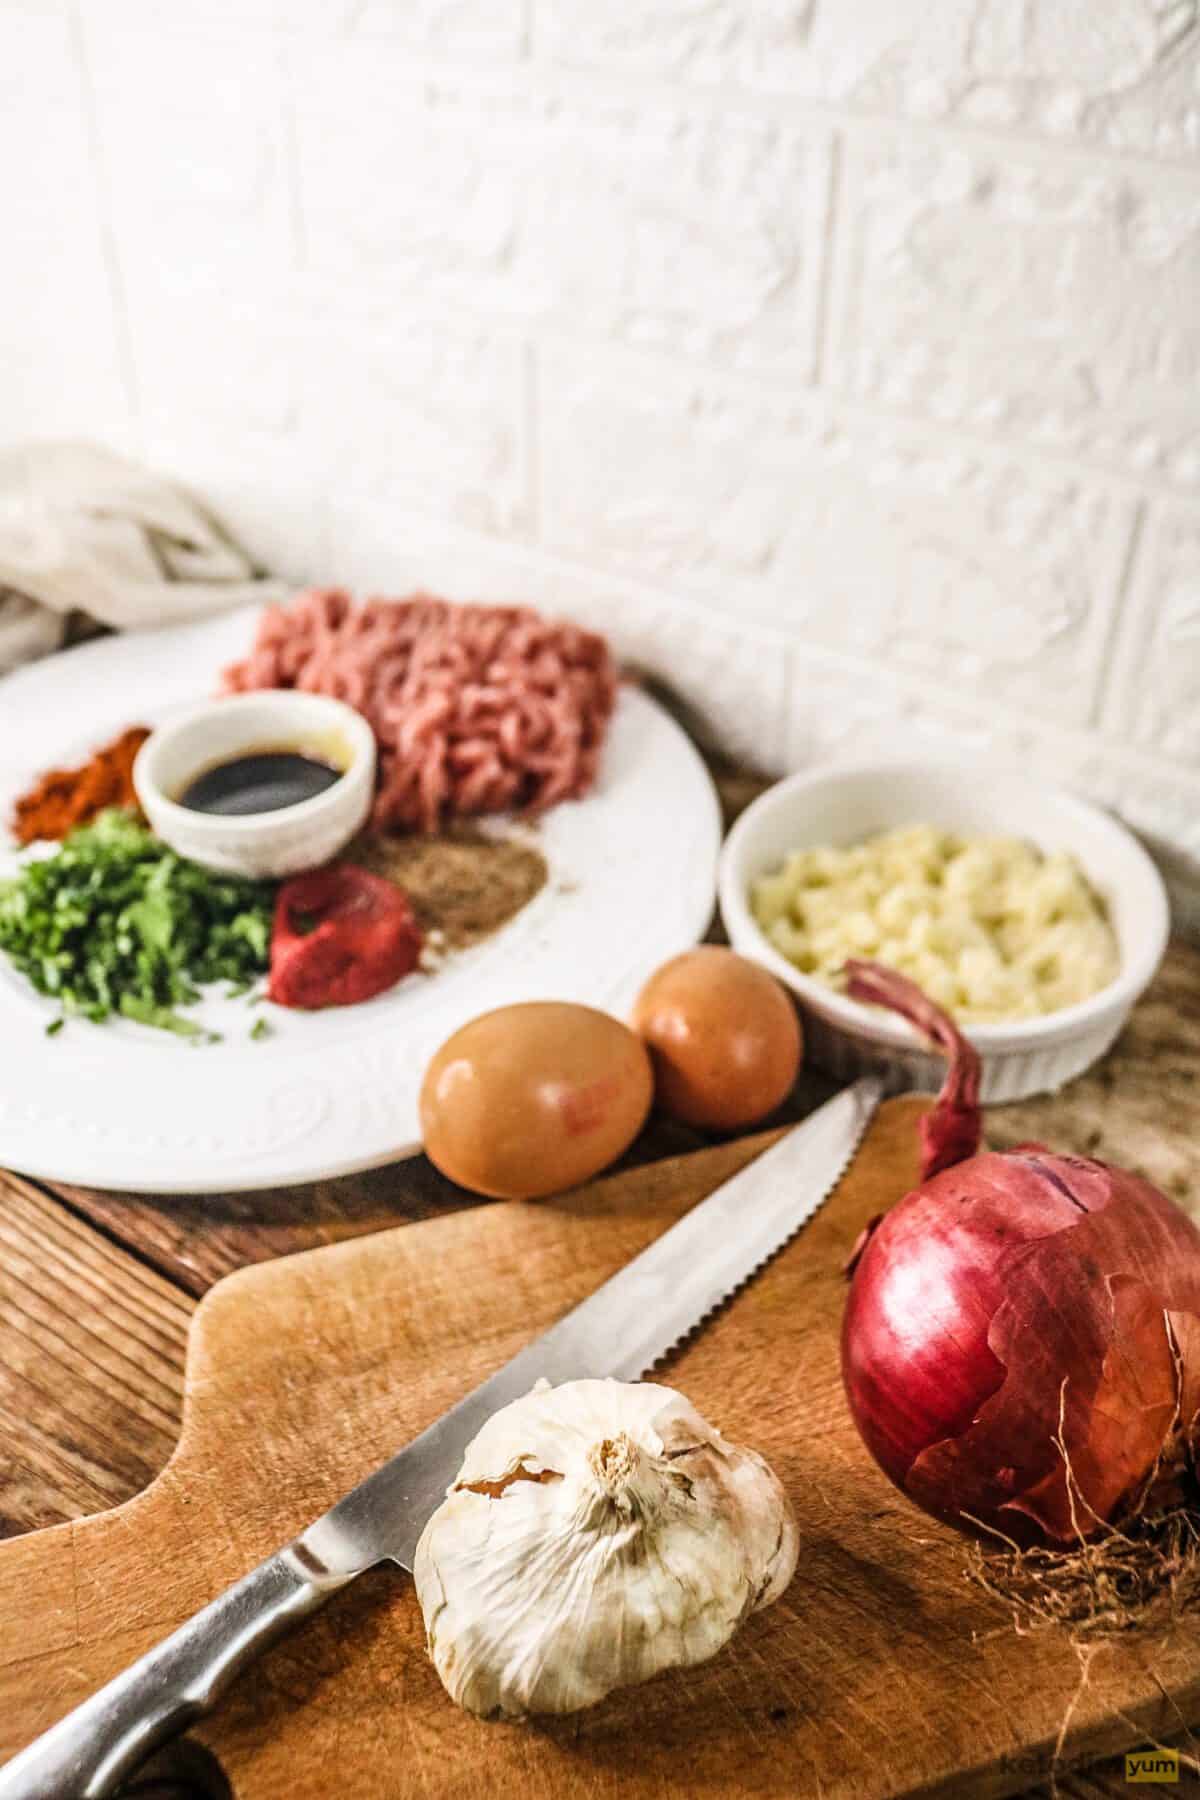 Ingredients for classic keto meatloaf arranged on a table